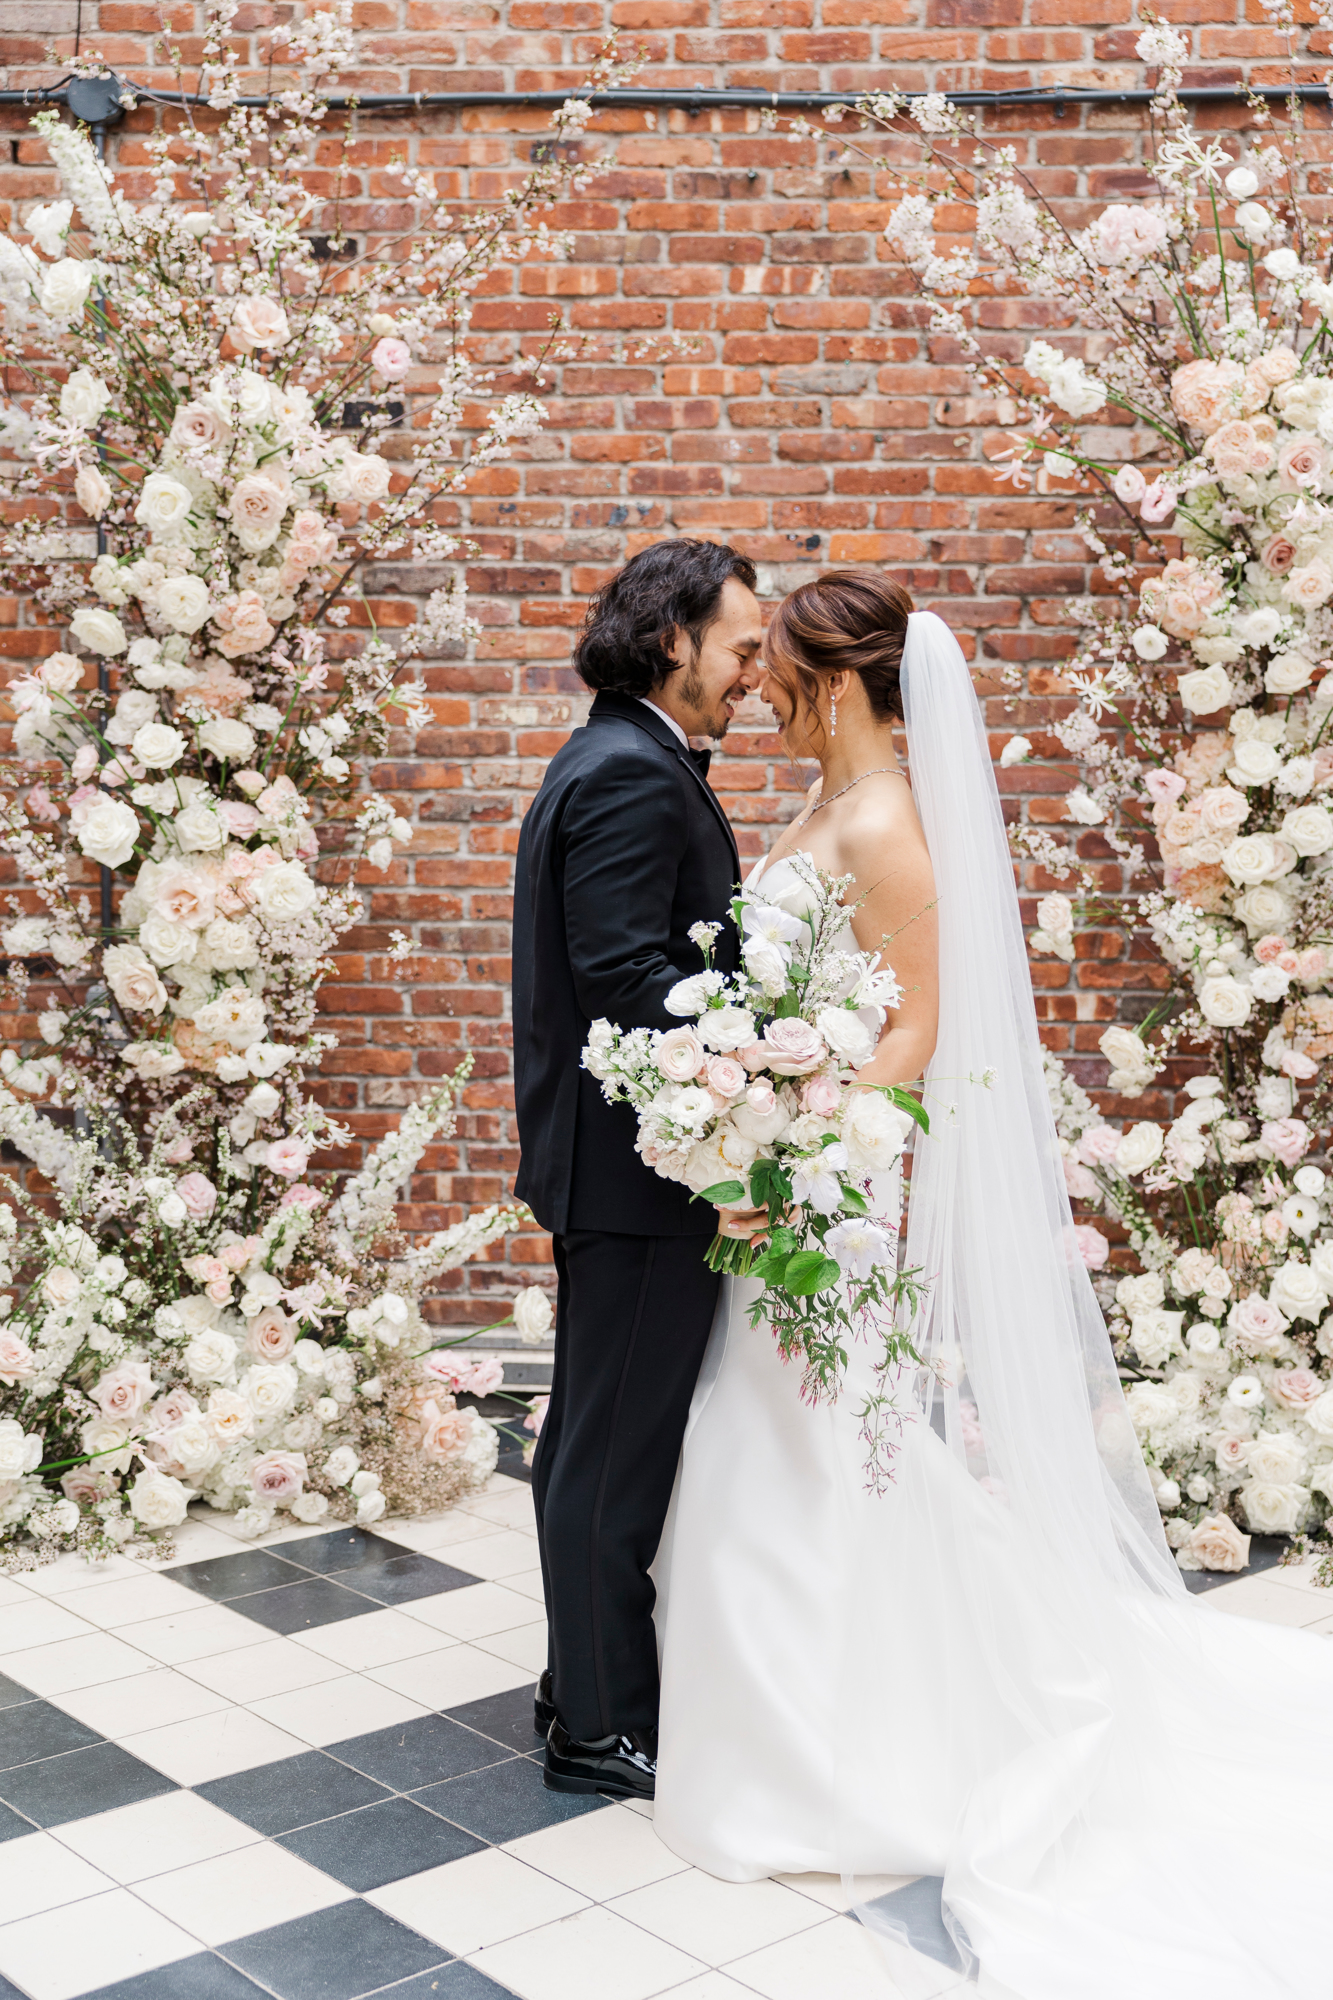 Incredible Wythe Hotel Wedding Photos in NYC